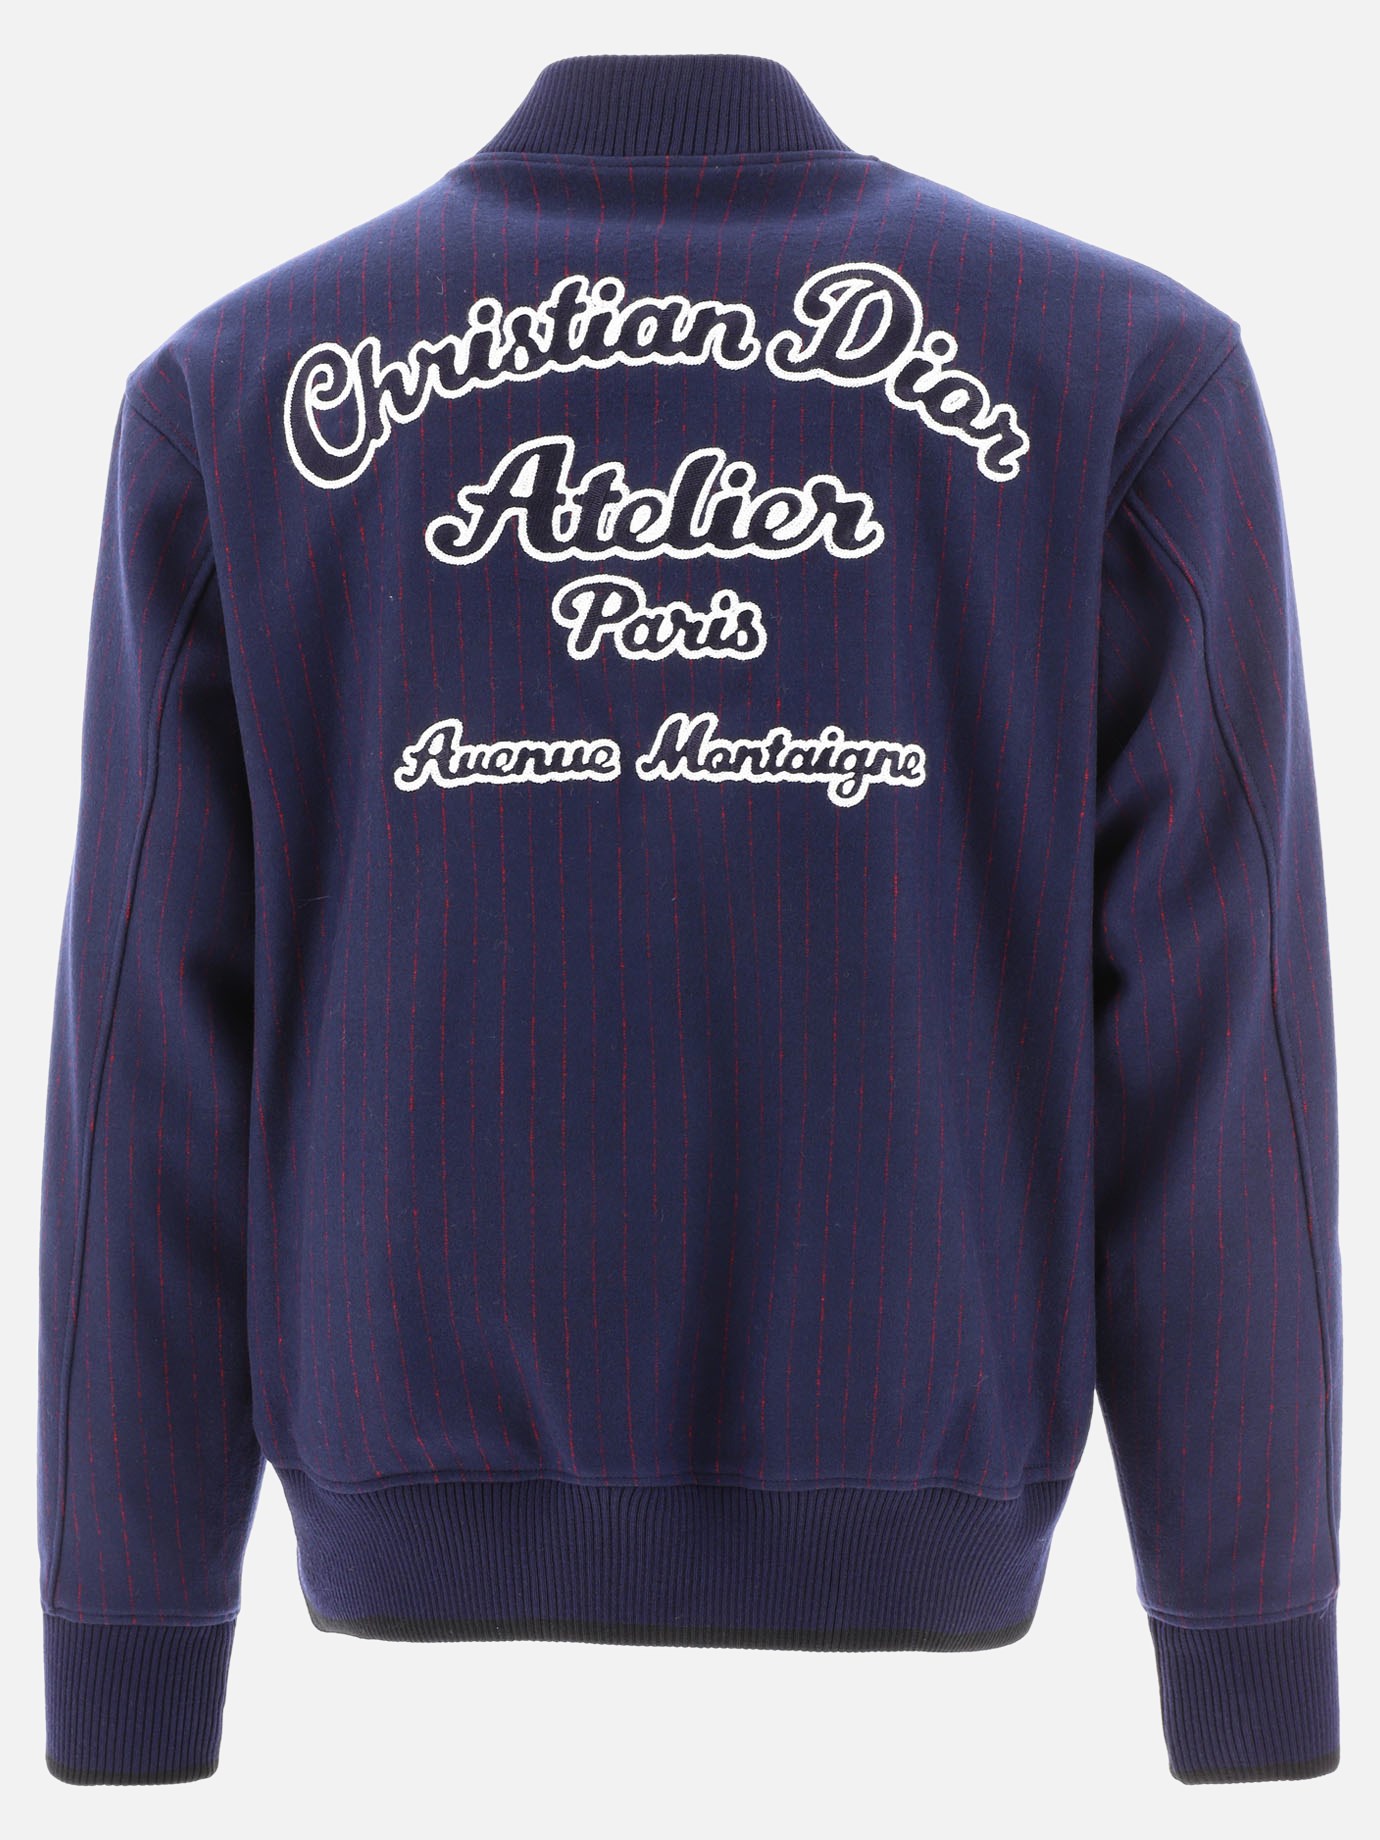  Christian Dior Atelier  bomber jacket by Dior